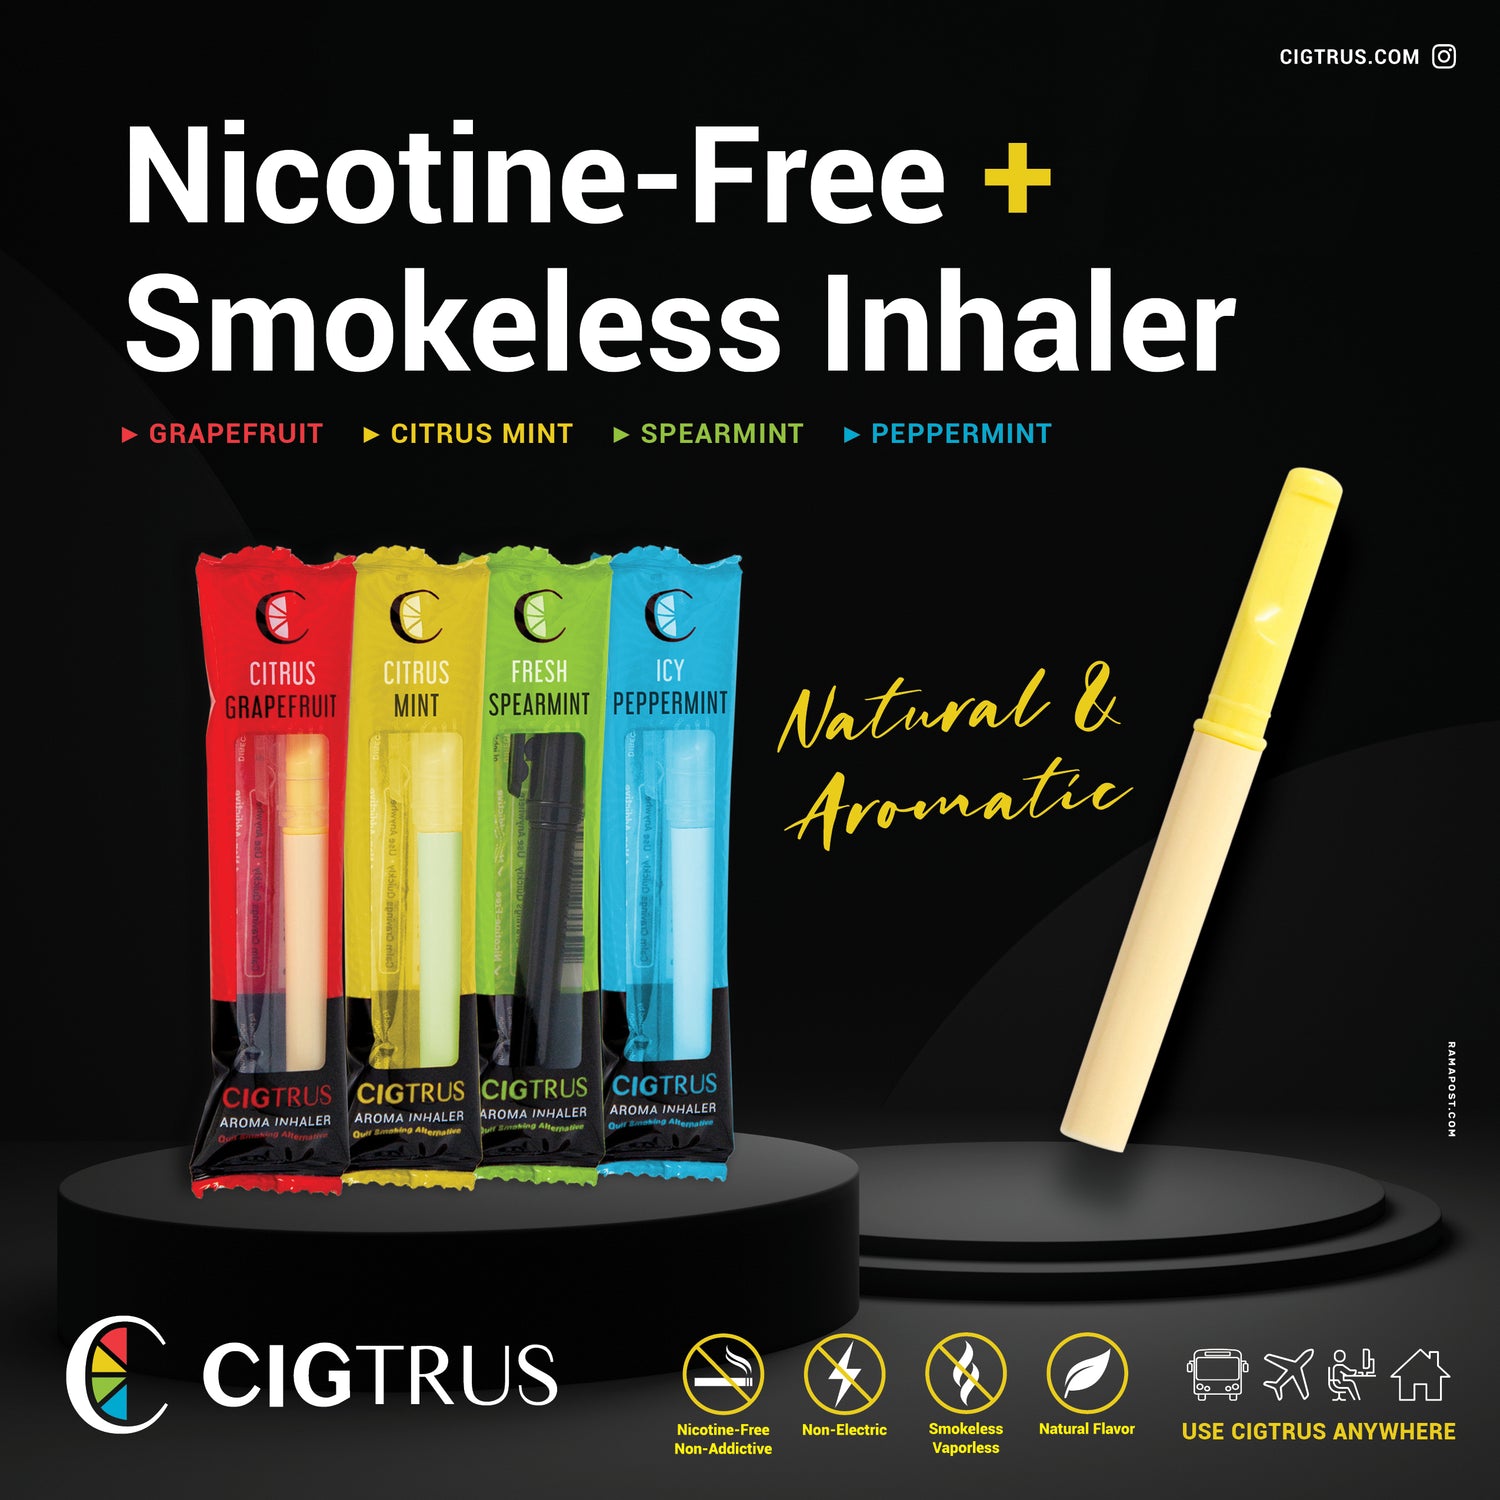 CIGTRUS: The Breath of Change in Quit-Smoking Solutions - cigtrus.com